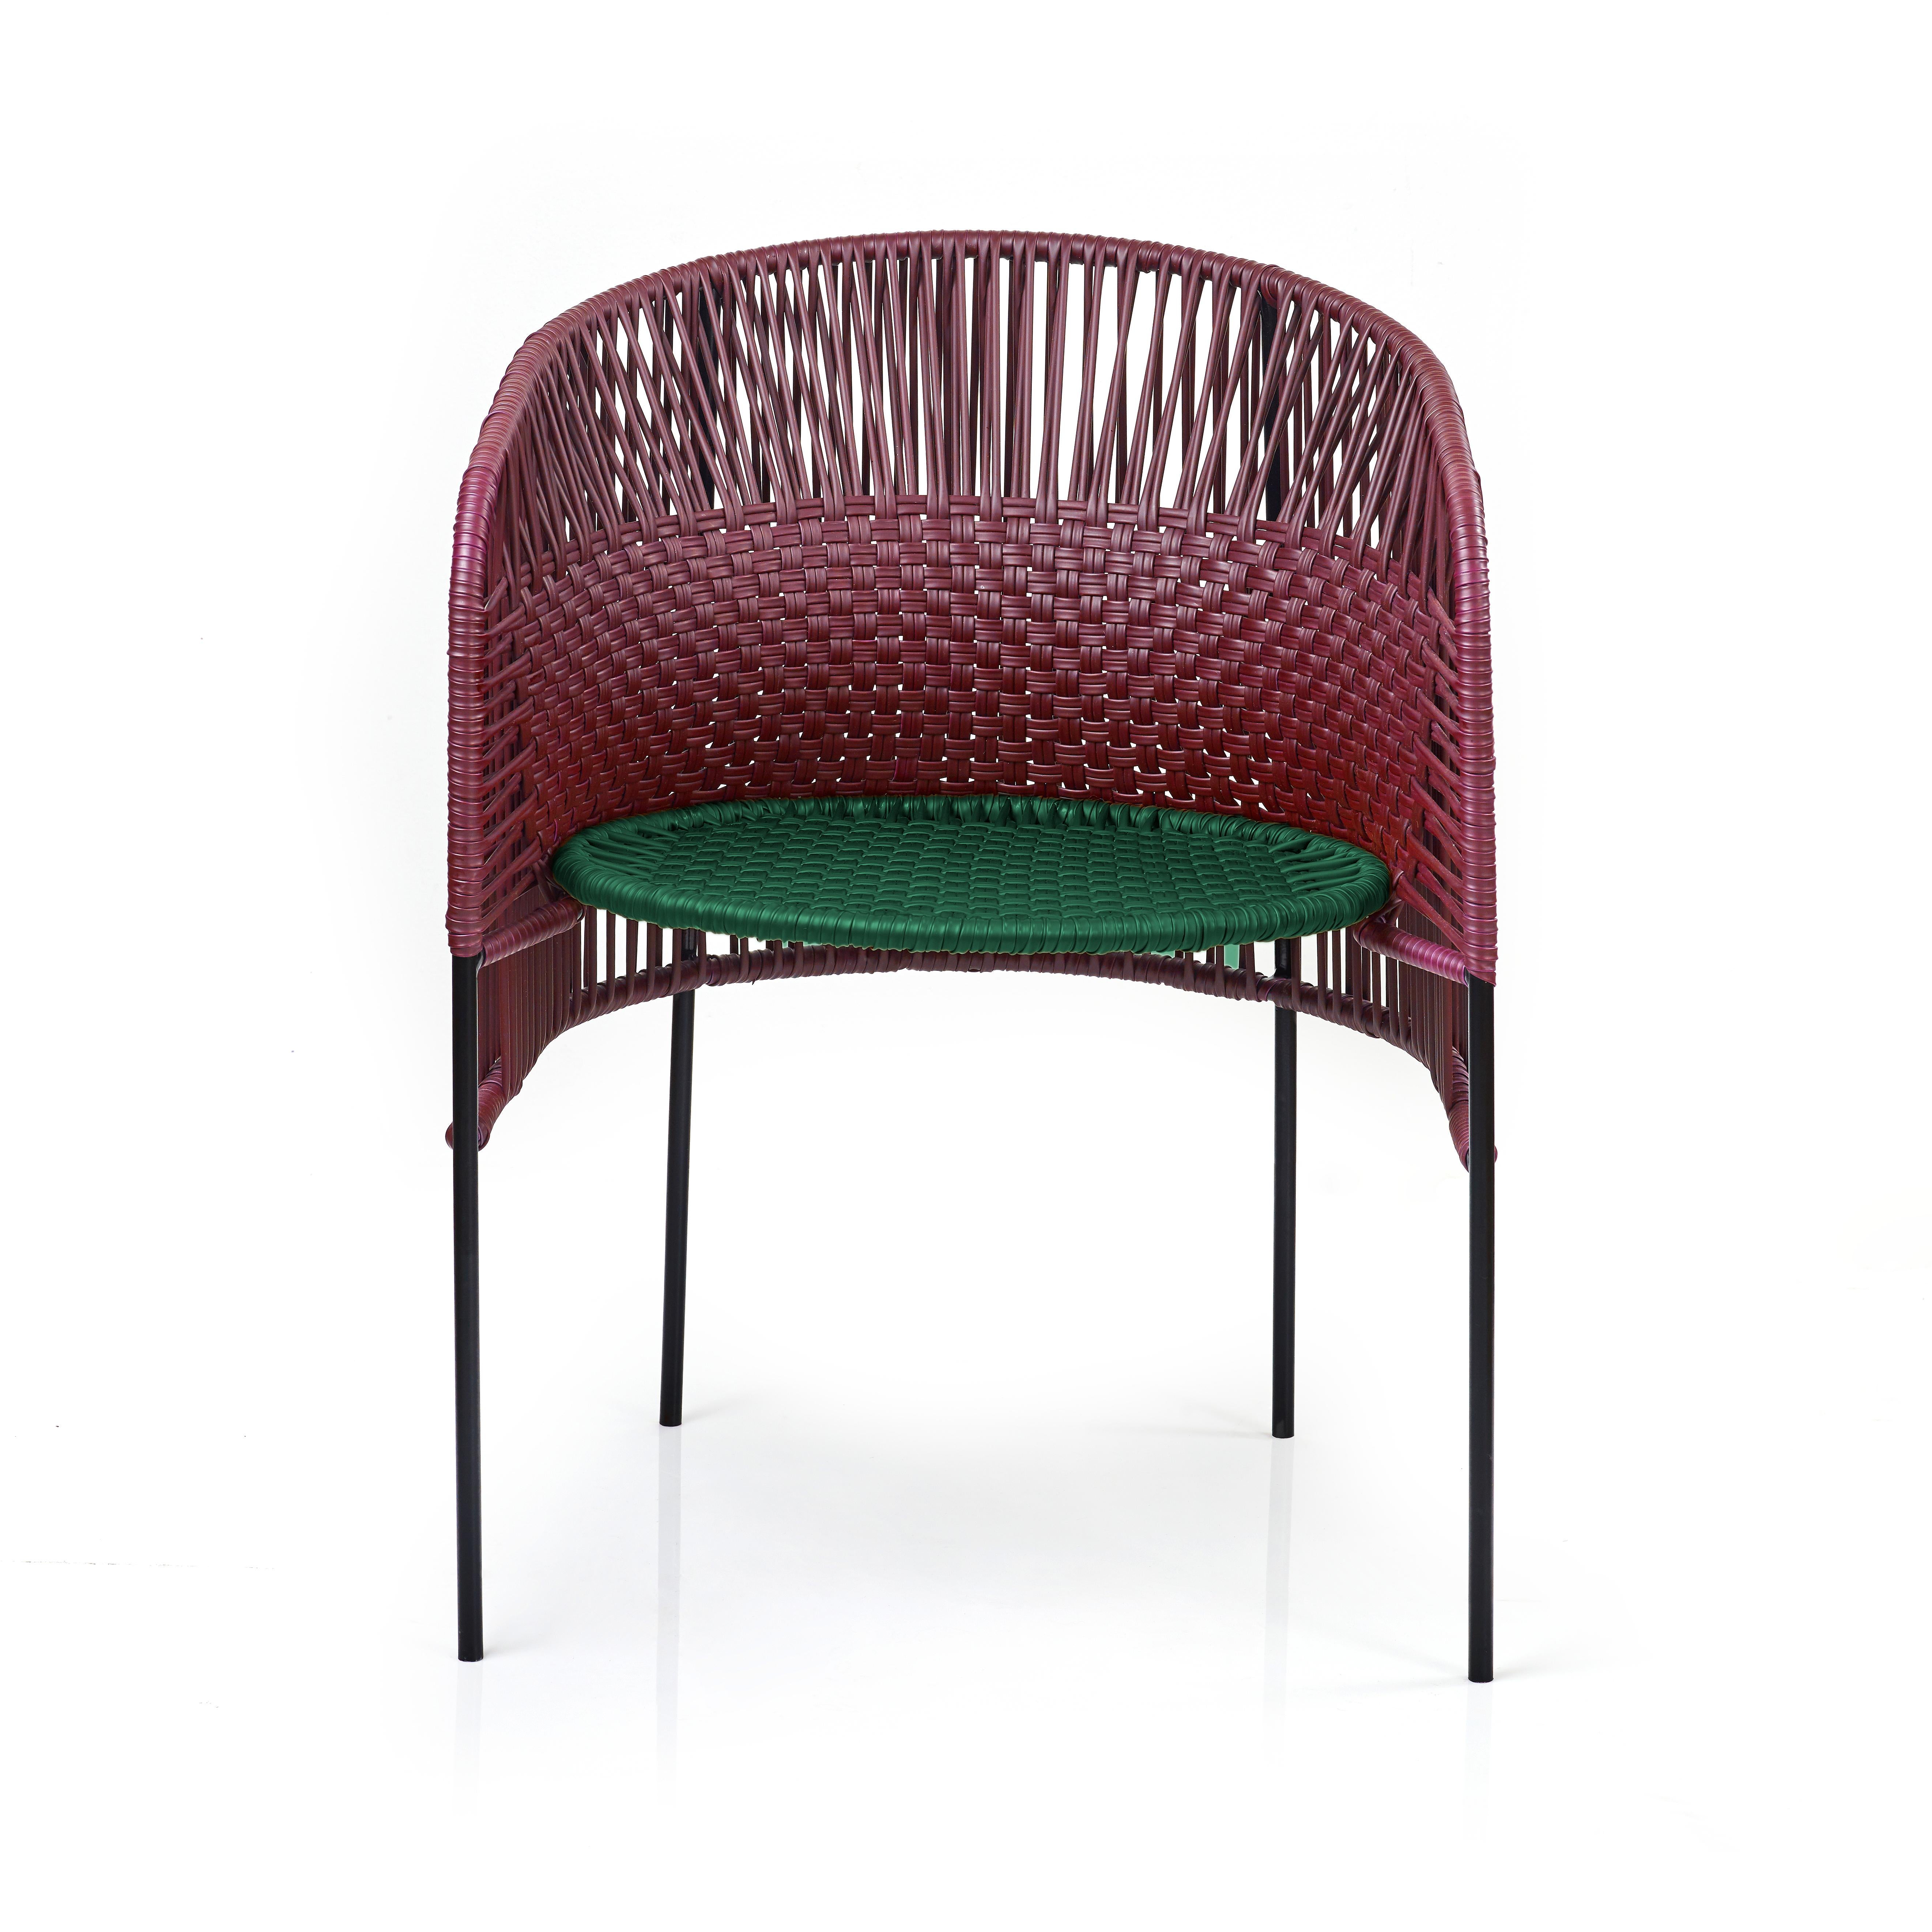 Violet green caribe chic dining chair by Sebastian Herkner
Materials: Galvanized and powder-coated tubular steel. PVC strings are made from recycled plastic.
Technique: Made from recycled plastic and weaved by local craftspeople in Colombia.